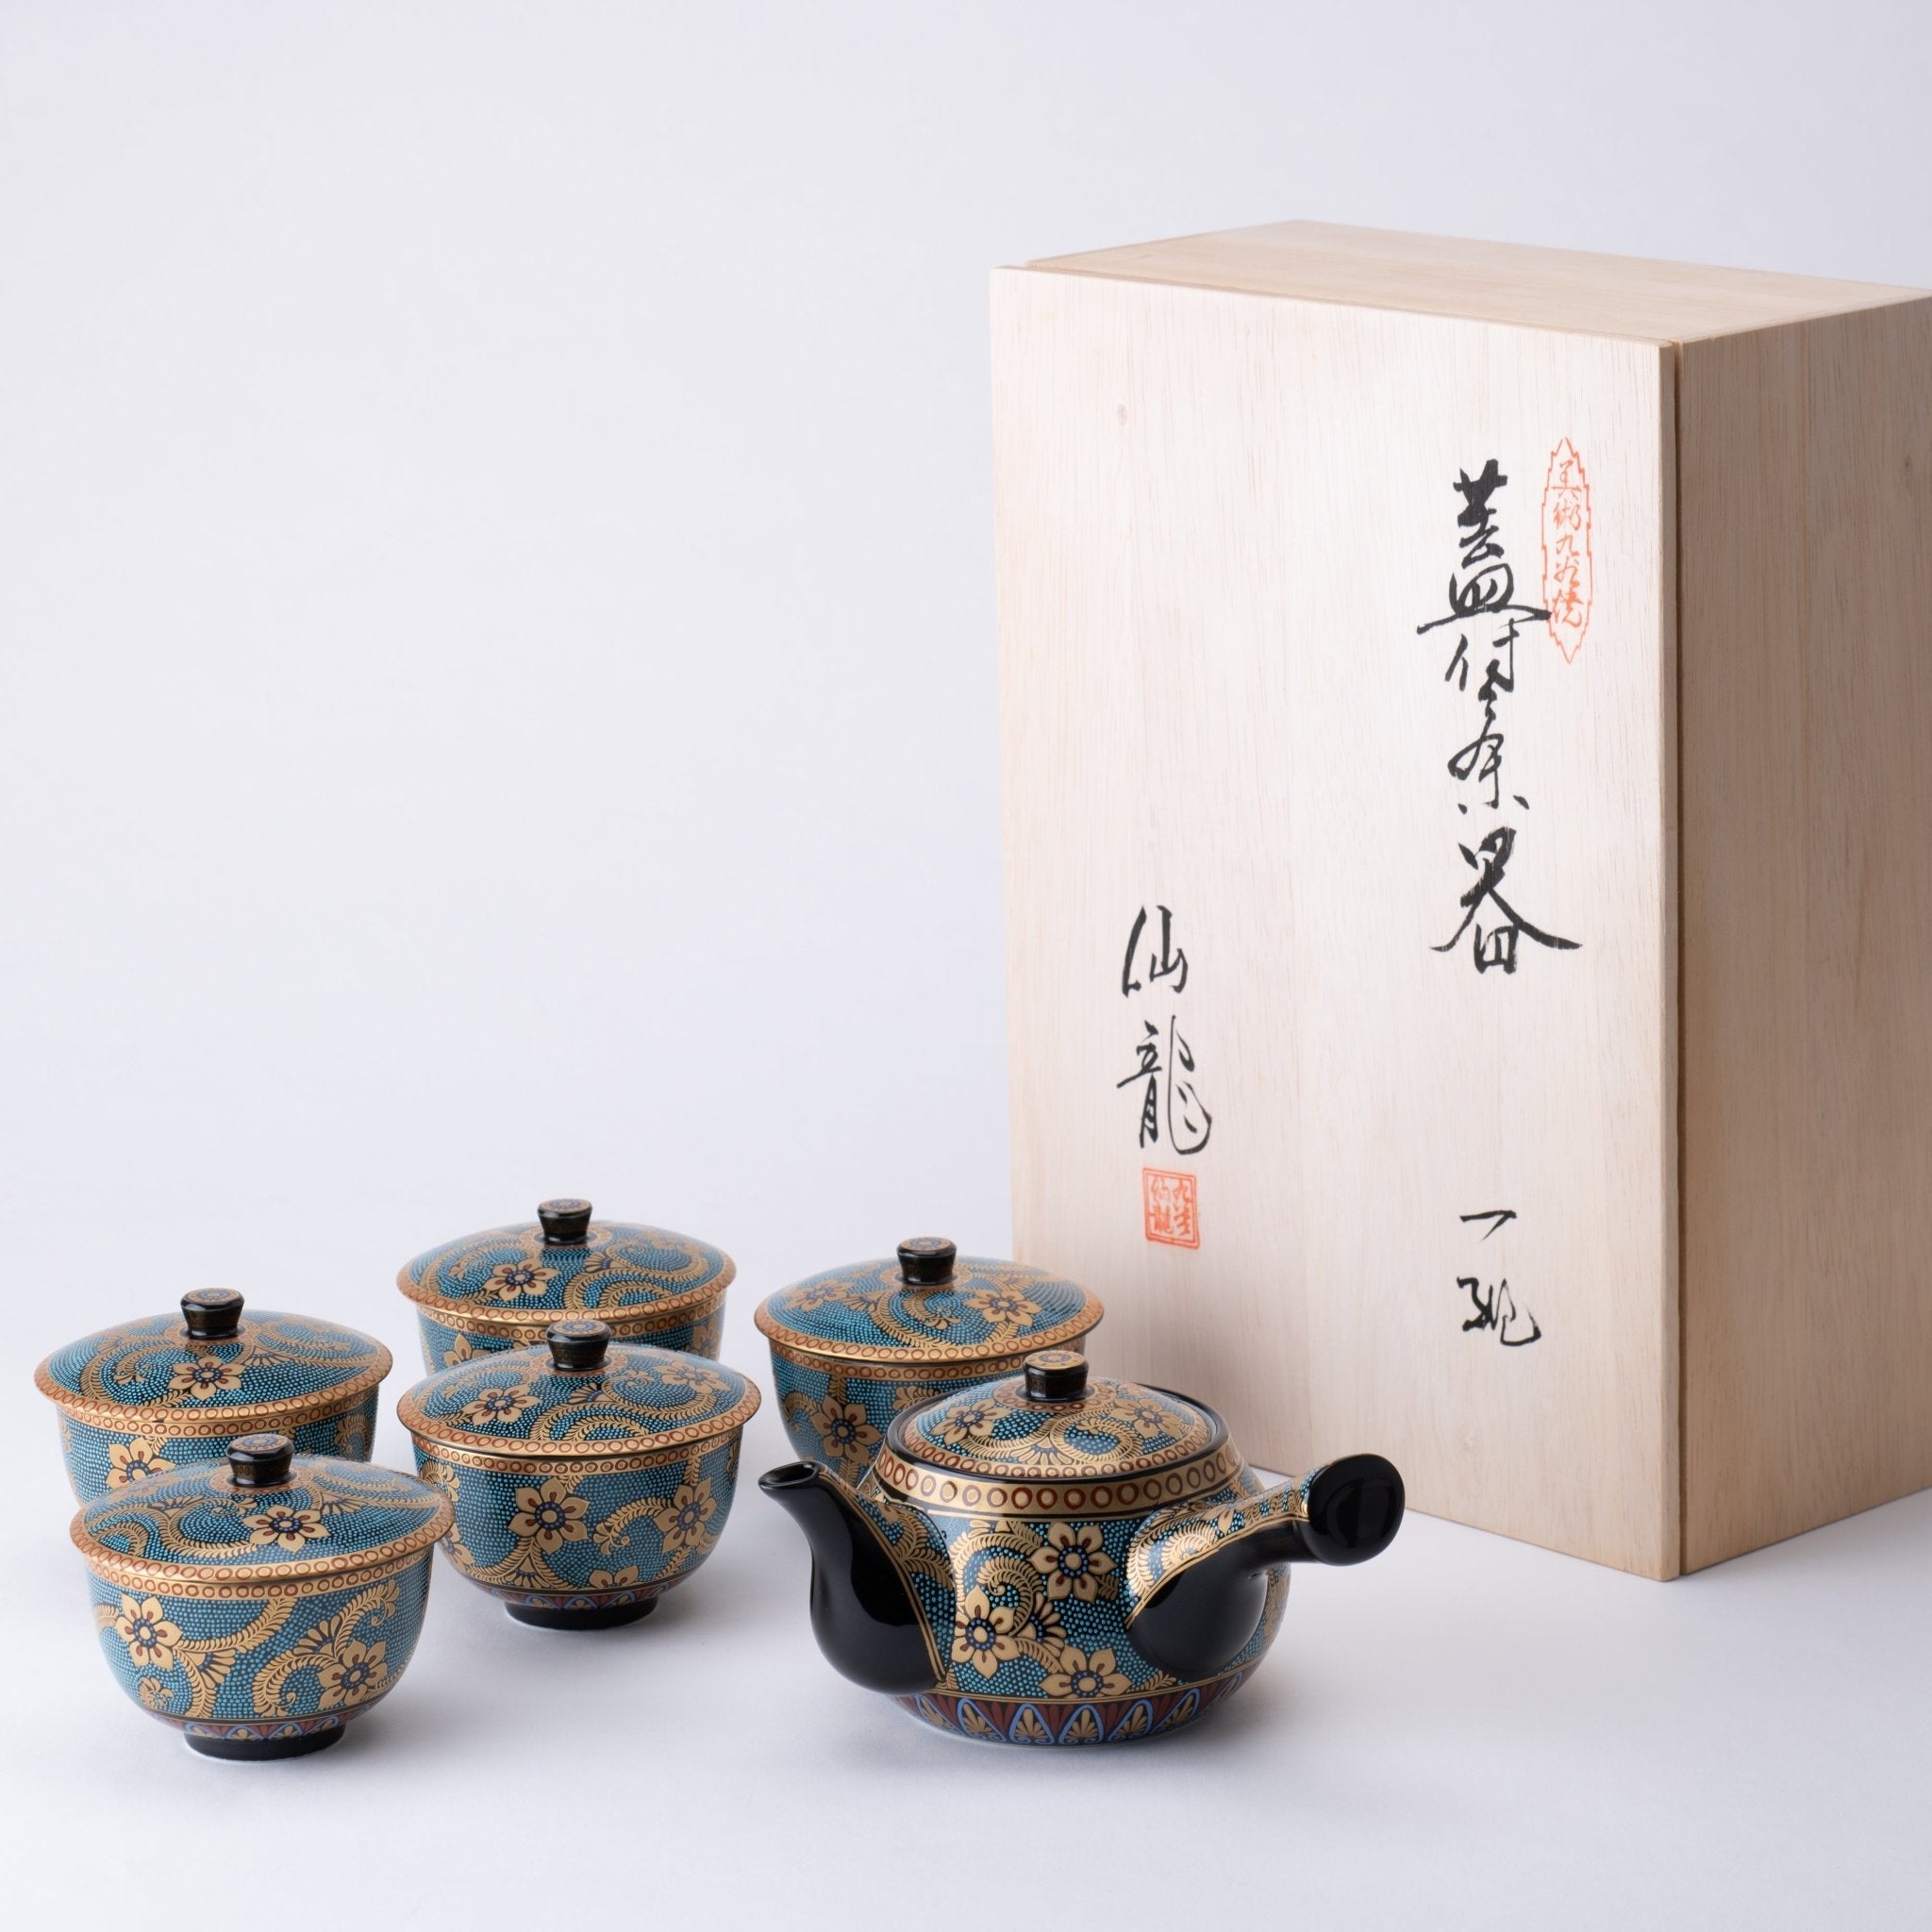 Japanese Kitchen Multi-functional Leaf-Style Ceramic Soy Sauce Dish 4-Piece Set Gift Box Packaging